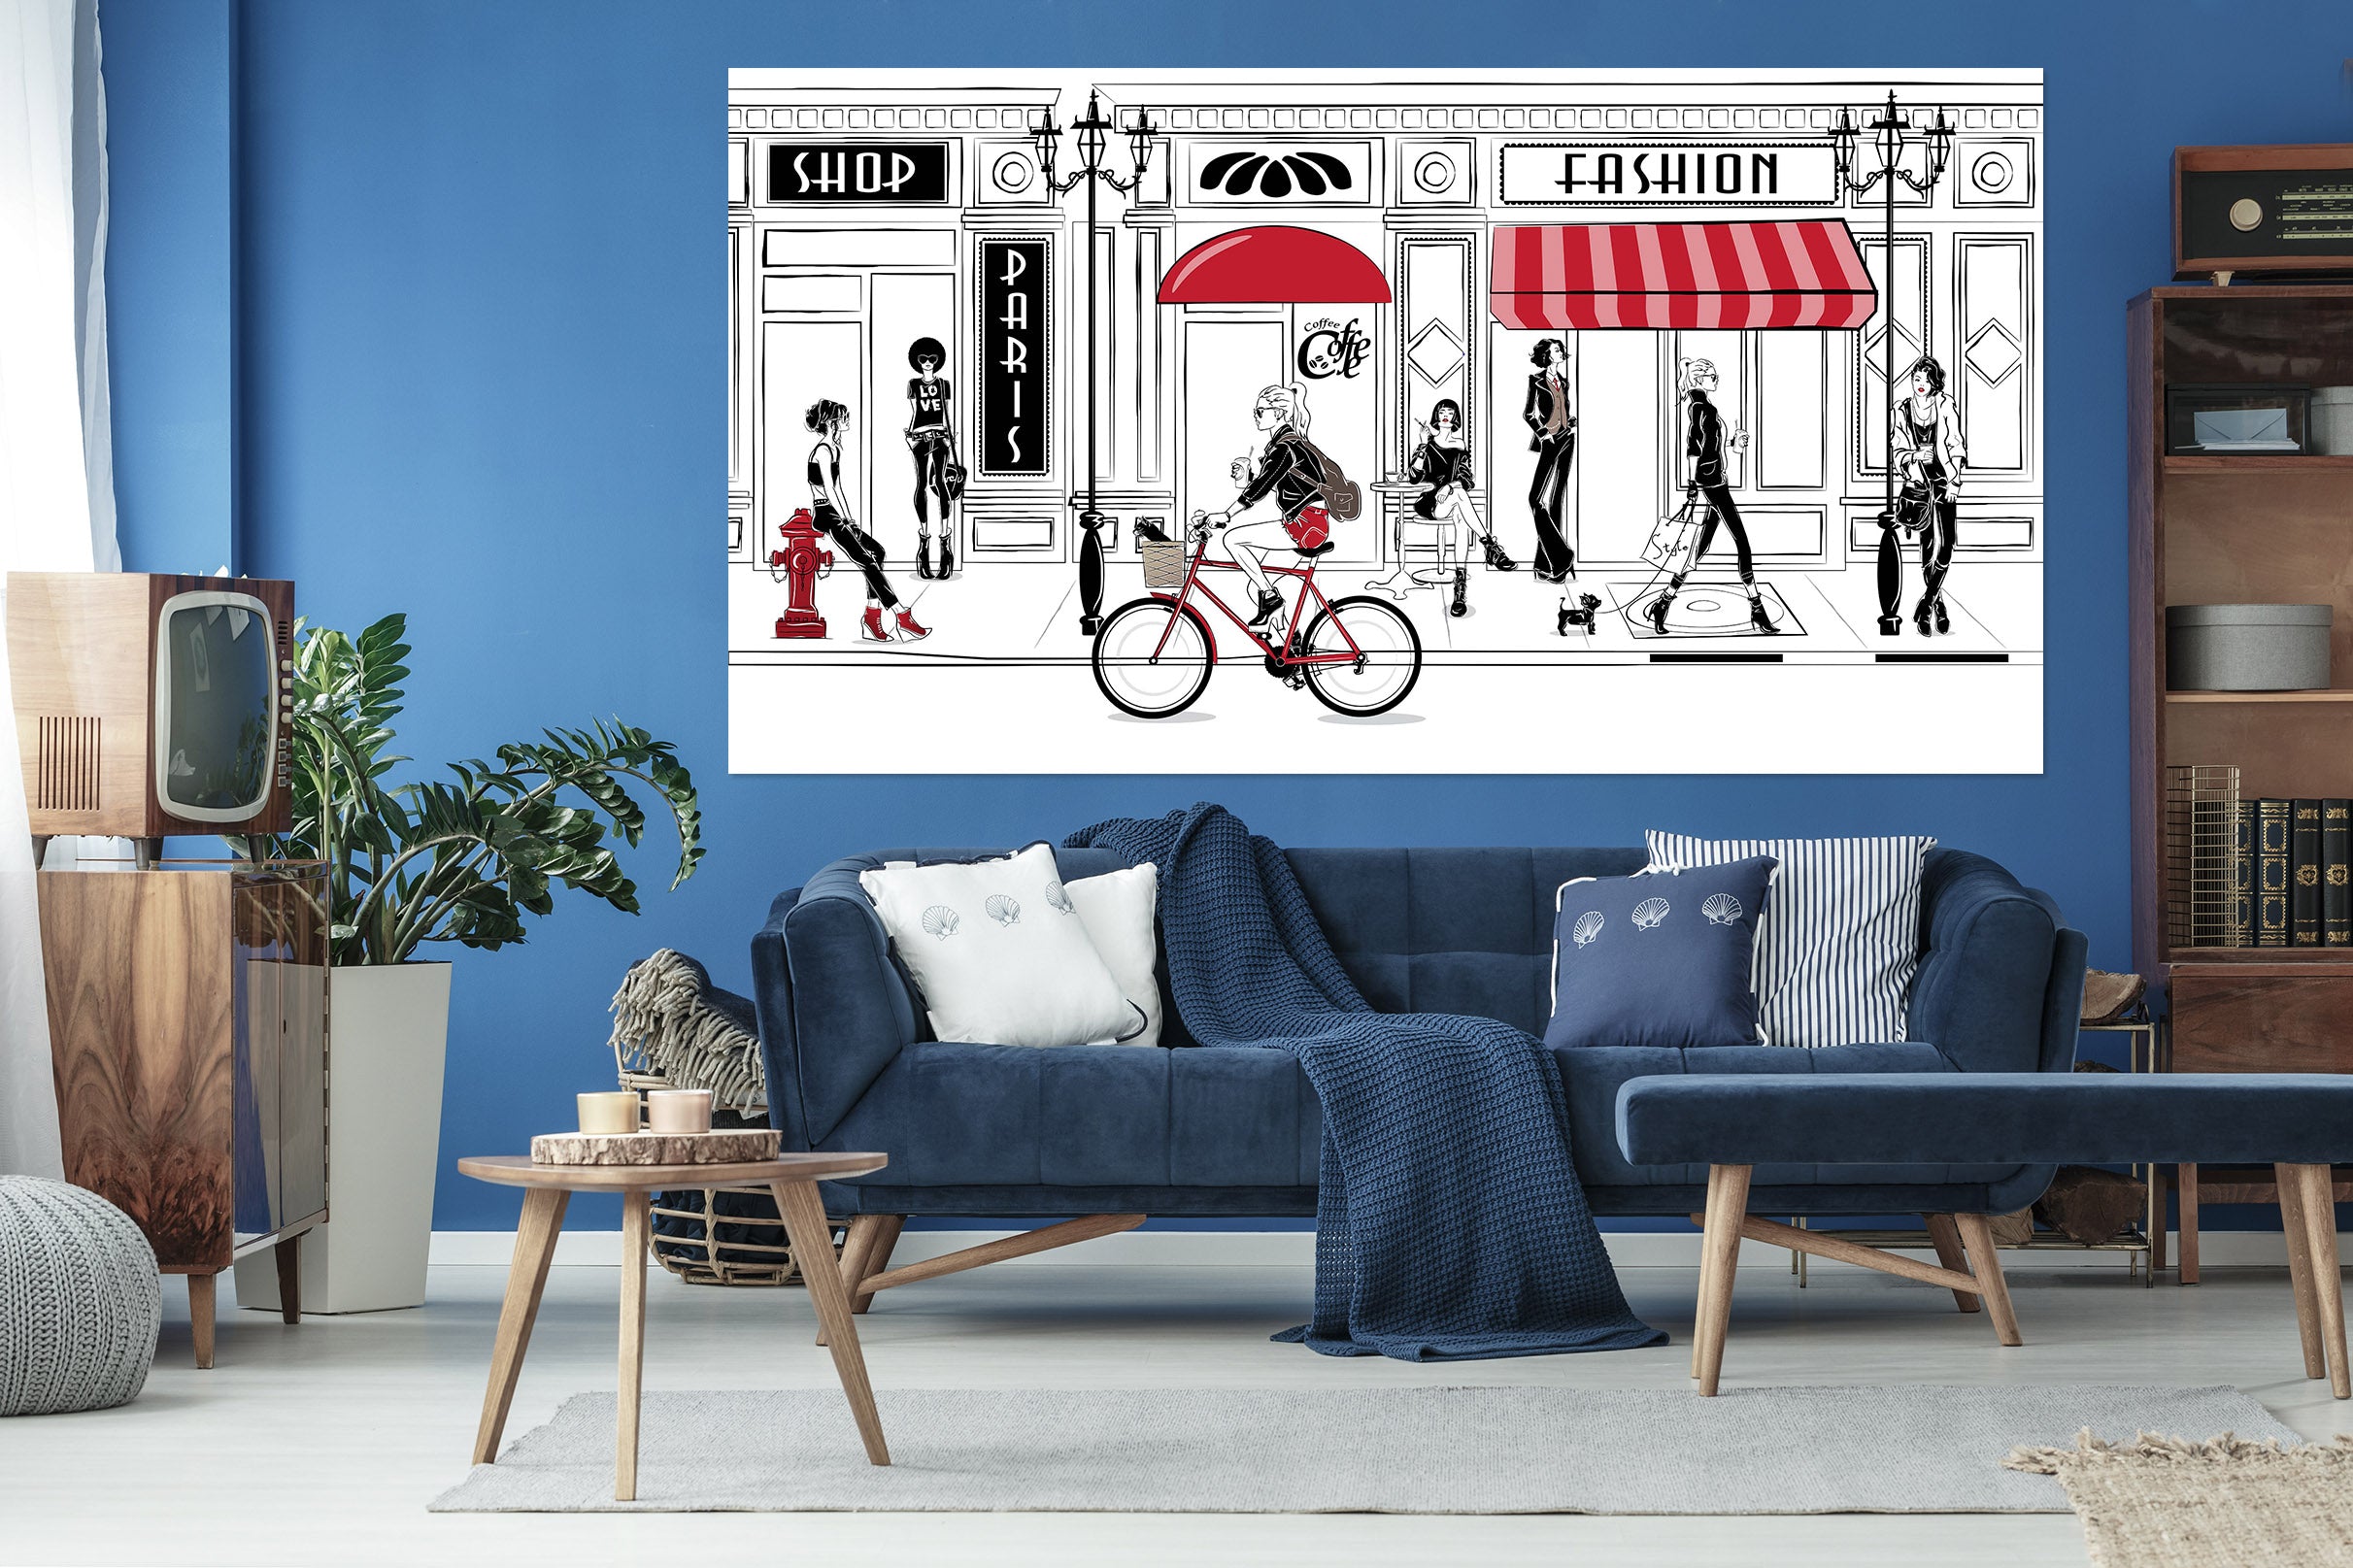 3D Woman Bicycle Shop 1057 Wall Sticker